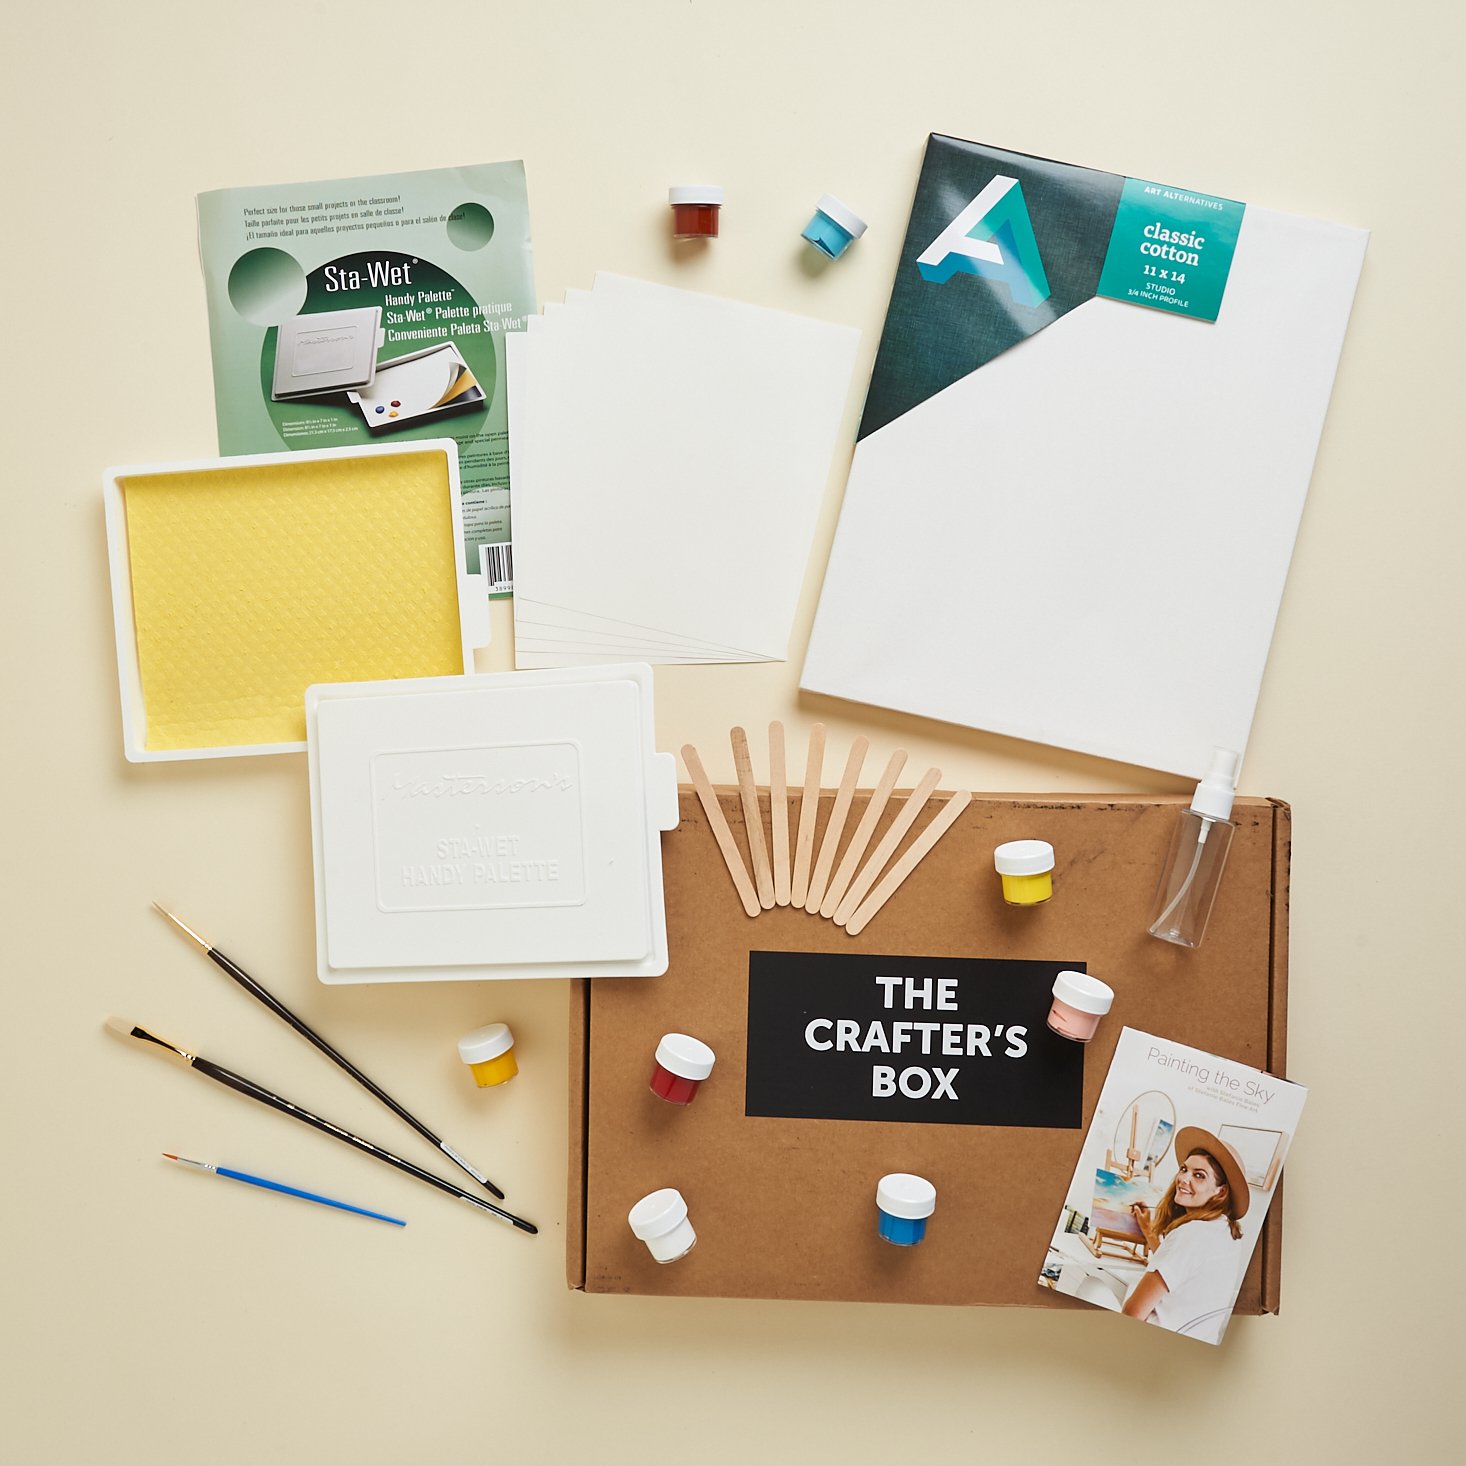 The Crafter’s Box “Painting the Sky” July 2021 Review